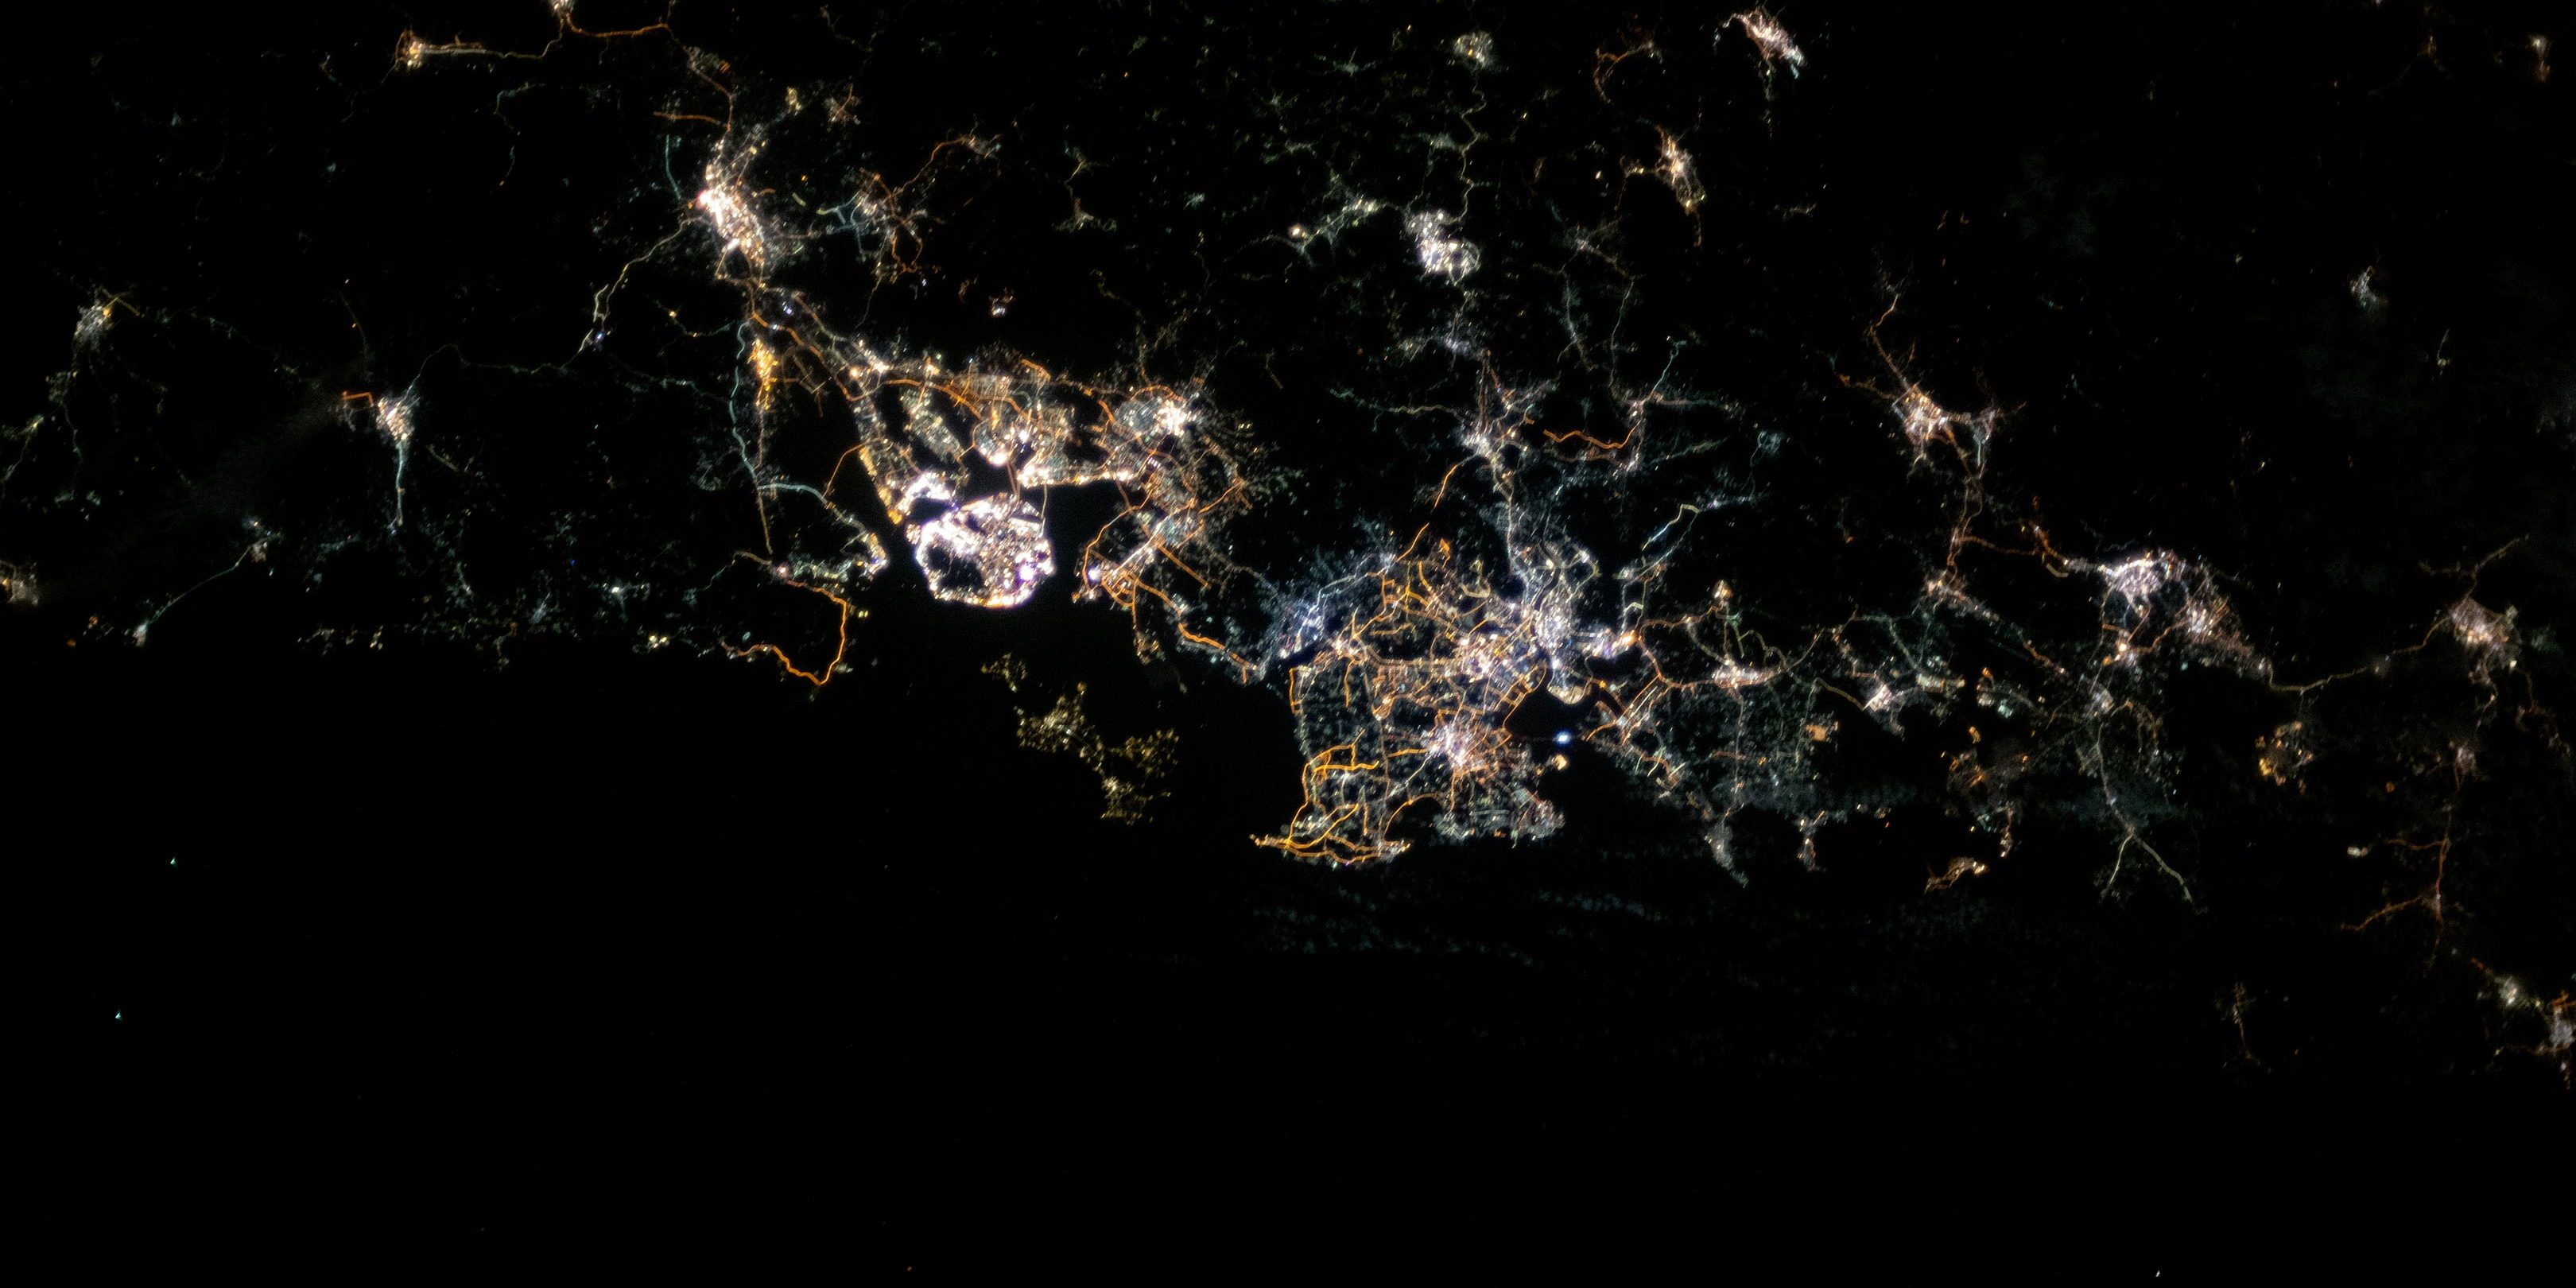 Image depicting city photos from space sent by astronauts from ISS